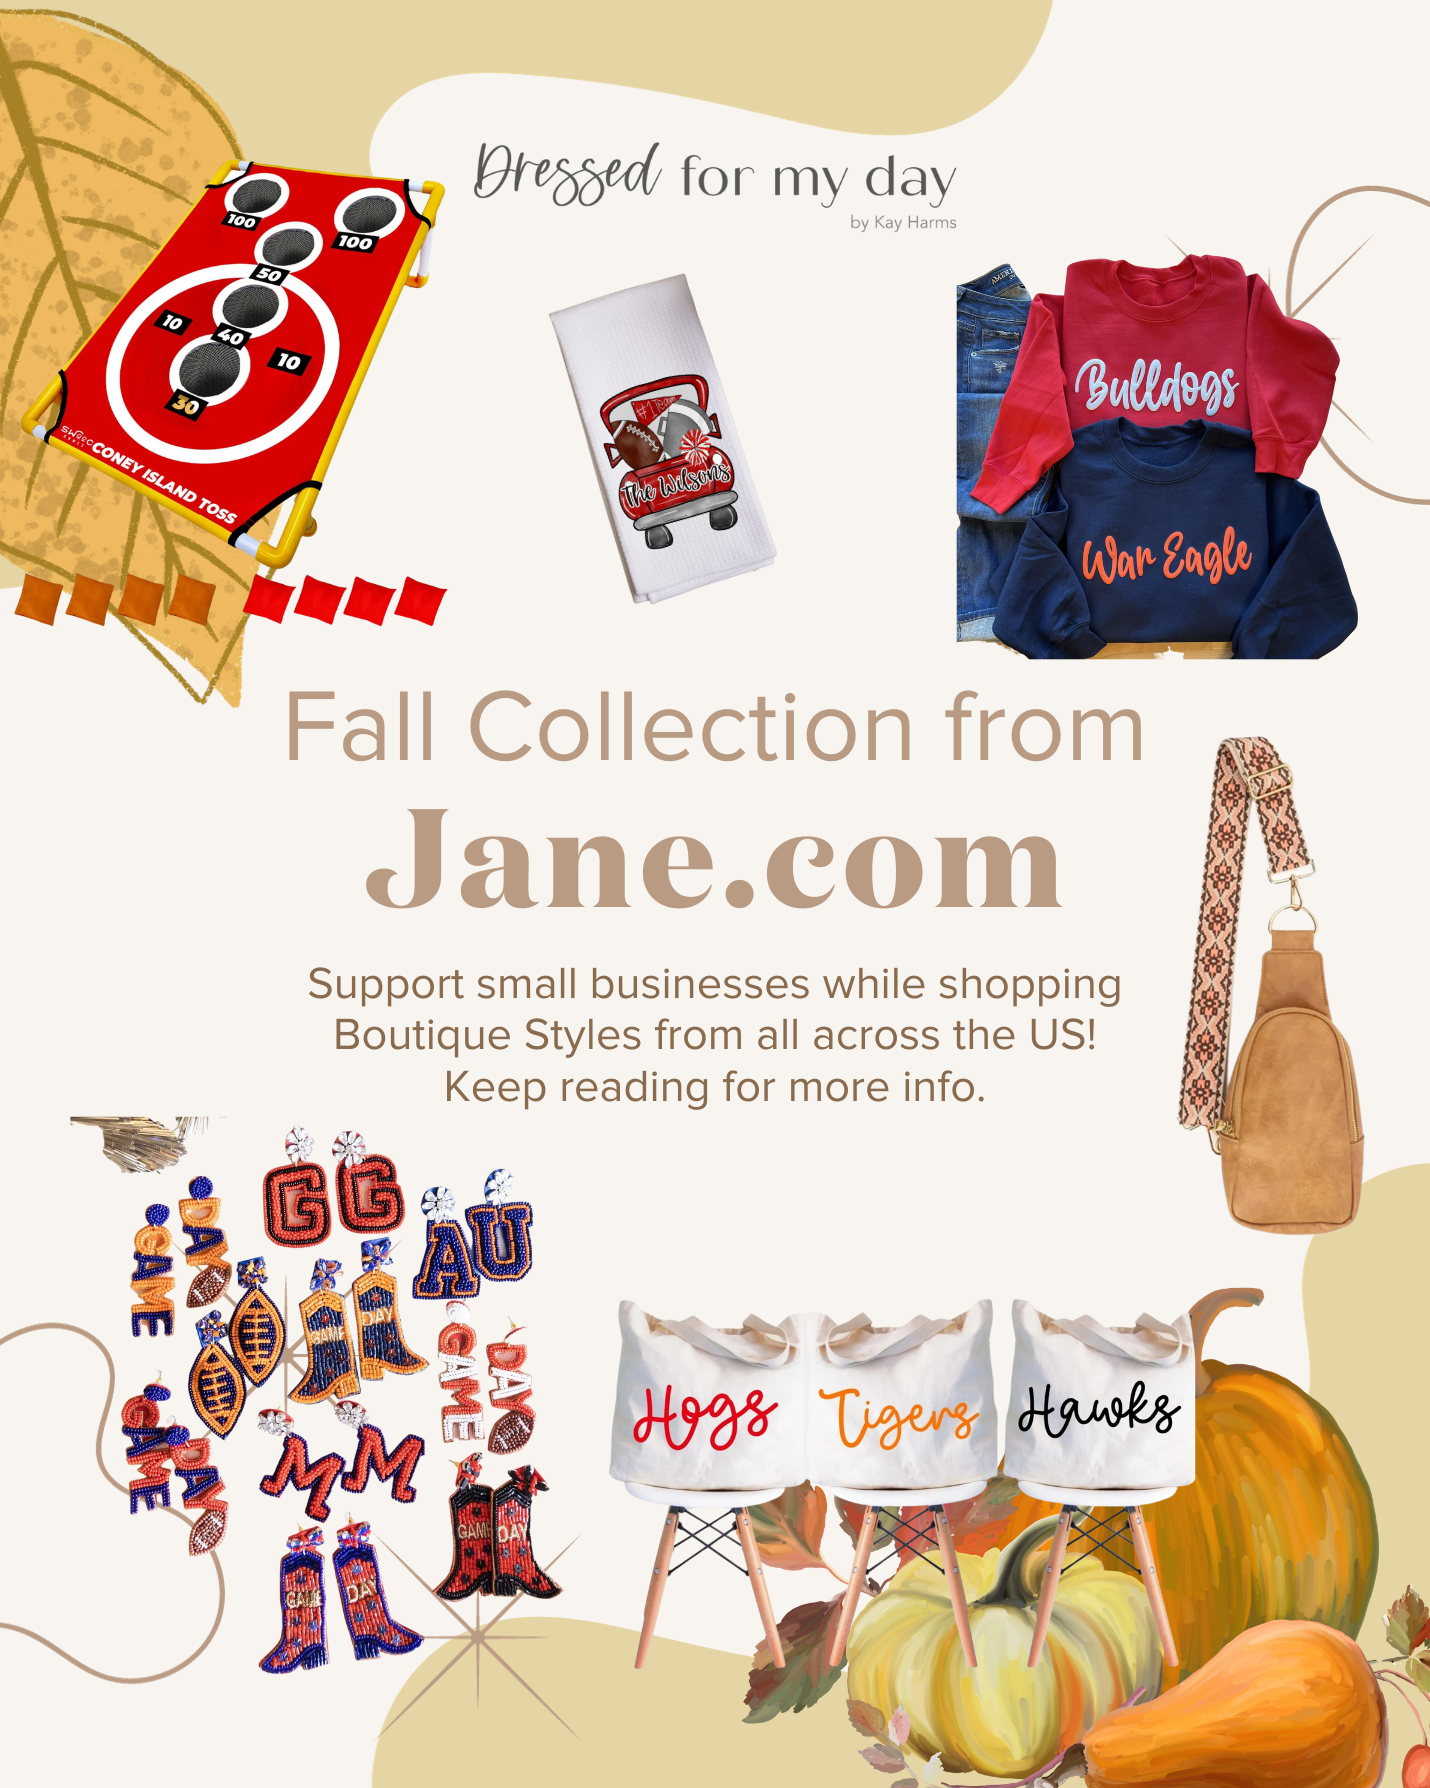 Fall Collection from Jane.com